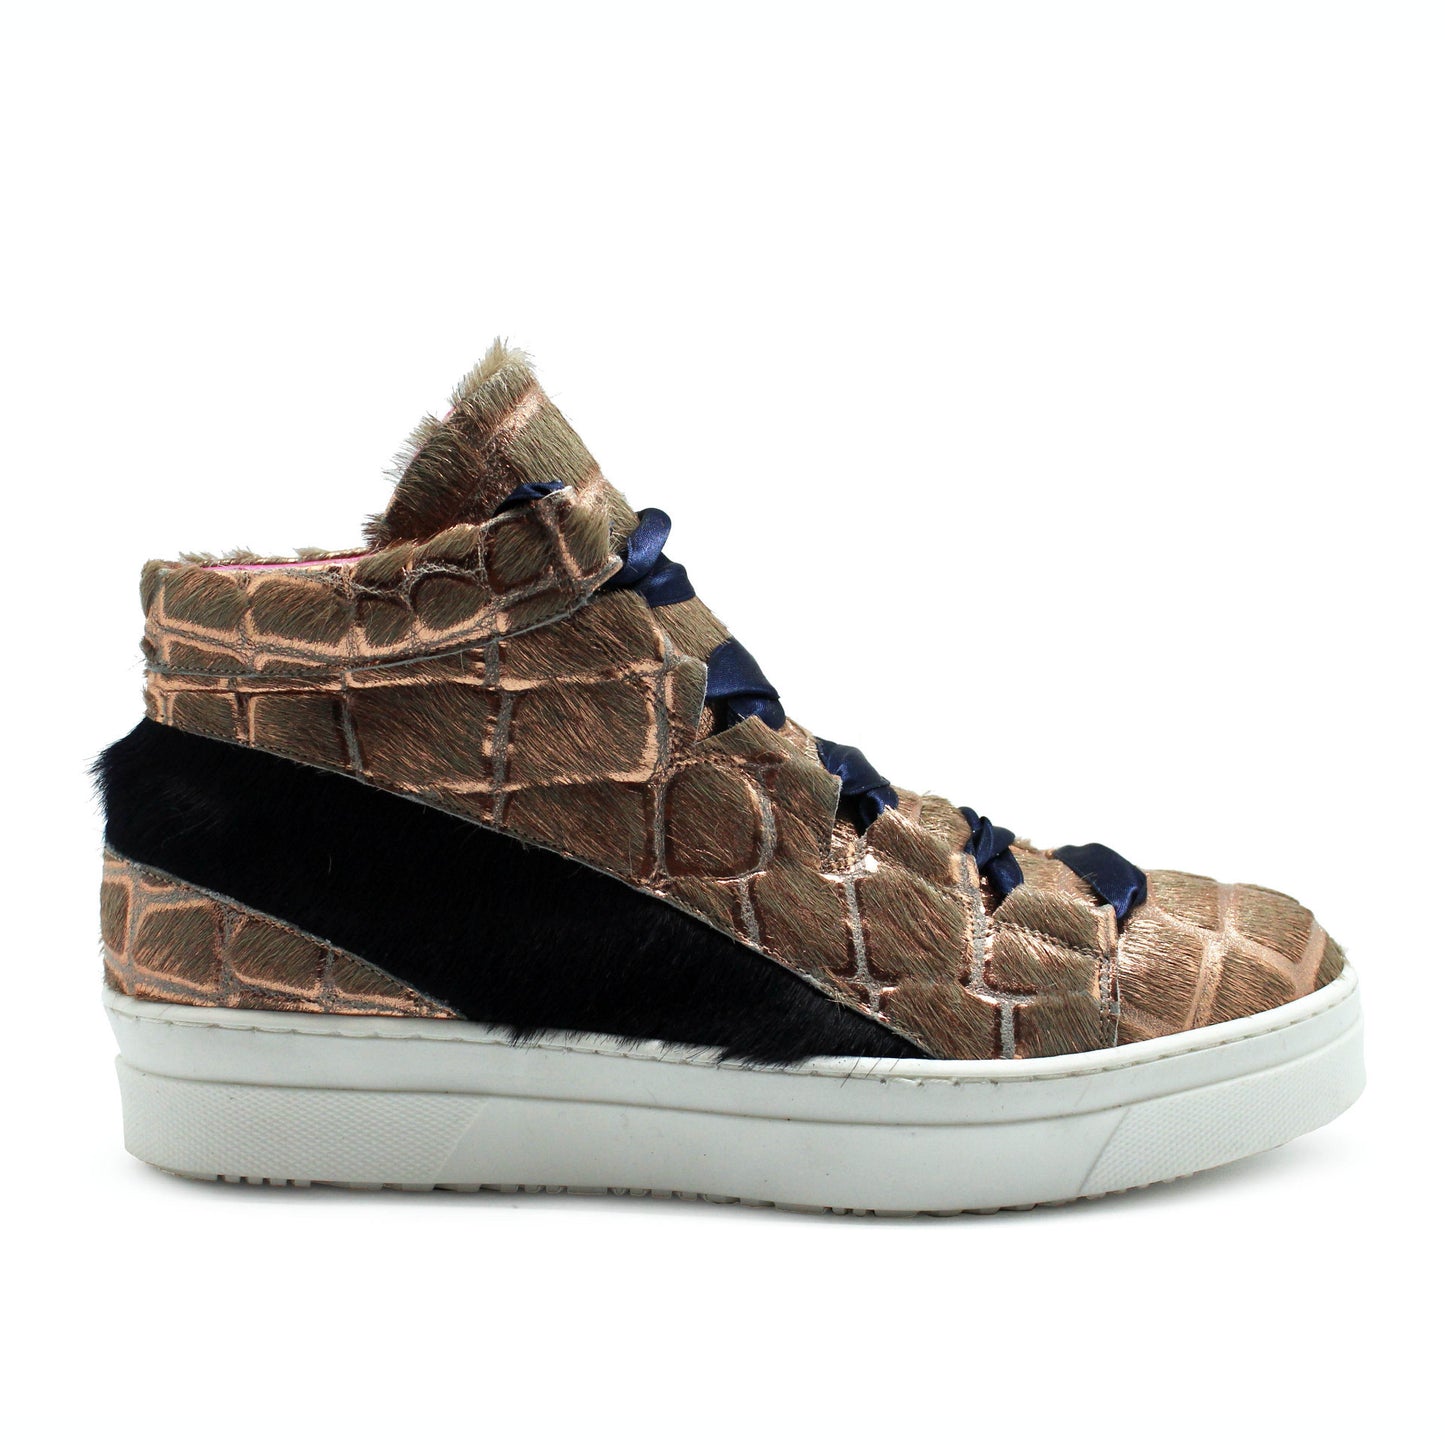 Patin - Rose Gold Pony high top sneaker-Last Pair 36